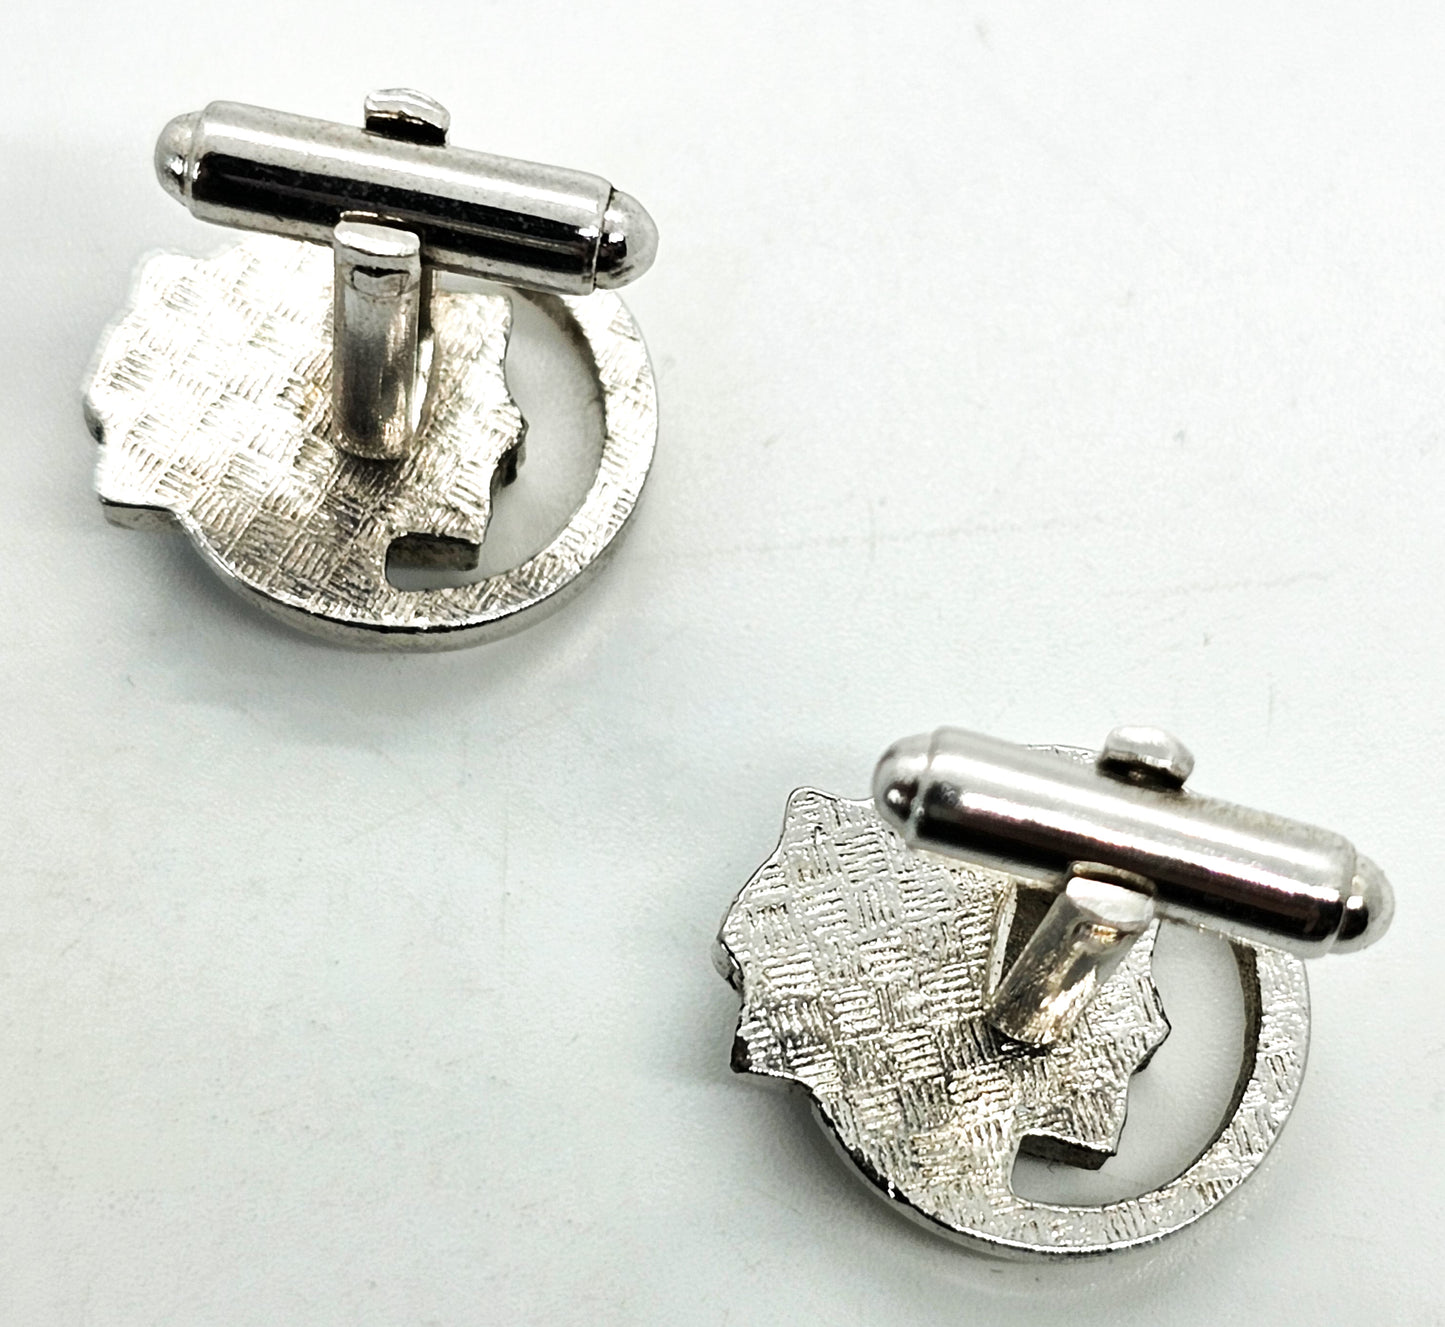 Chevy Car vintage silver toned open work cuff links